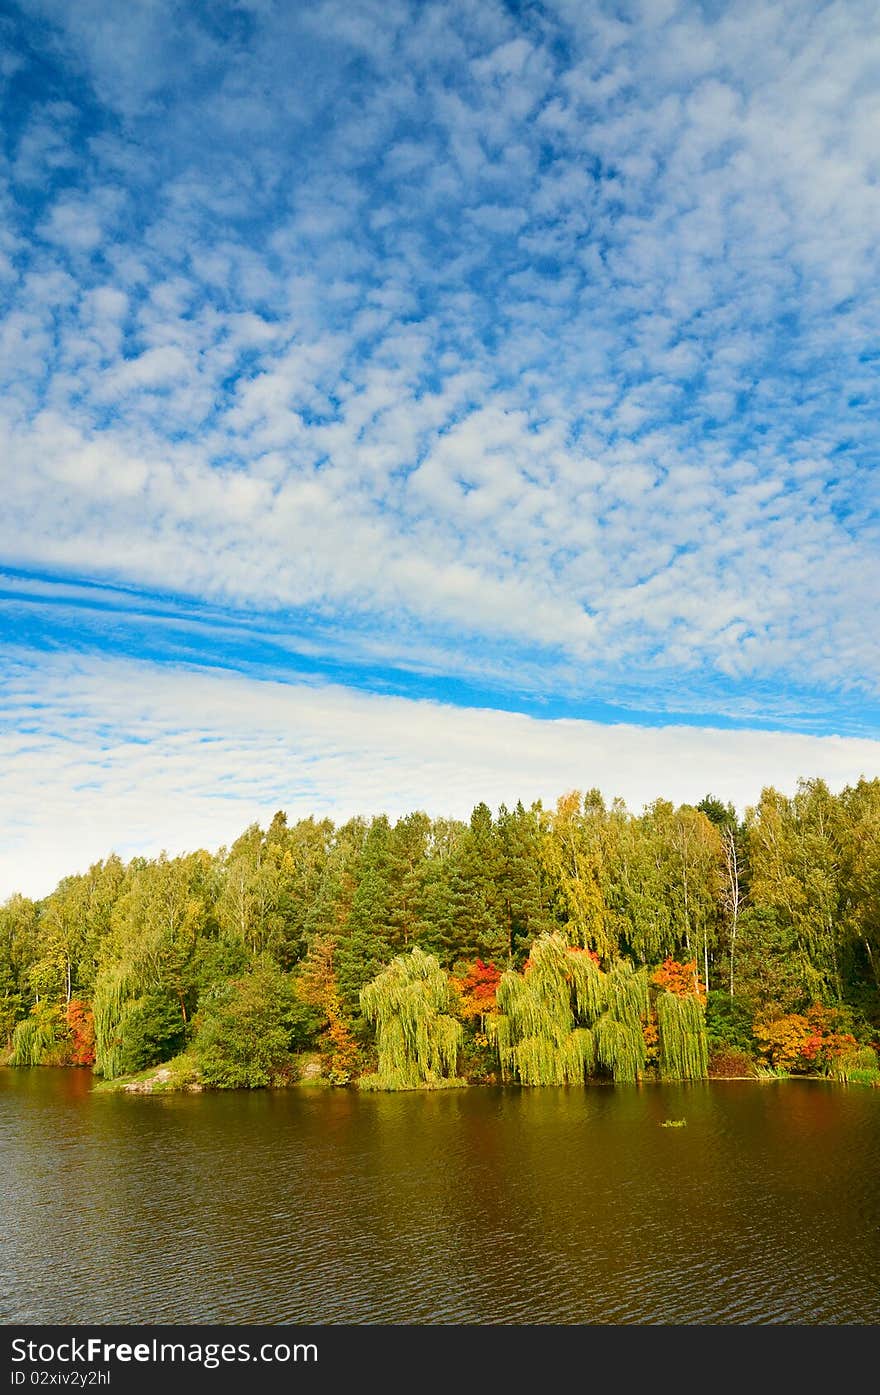 Picturesque autumn landscape of lake and blue sky. Picturesque autumn landscape of lake and blue sky.